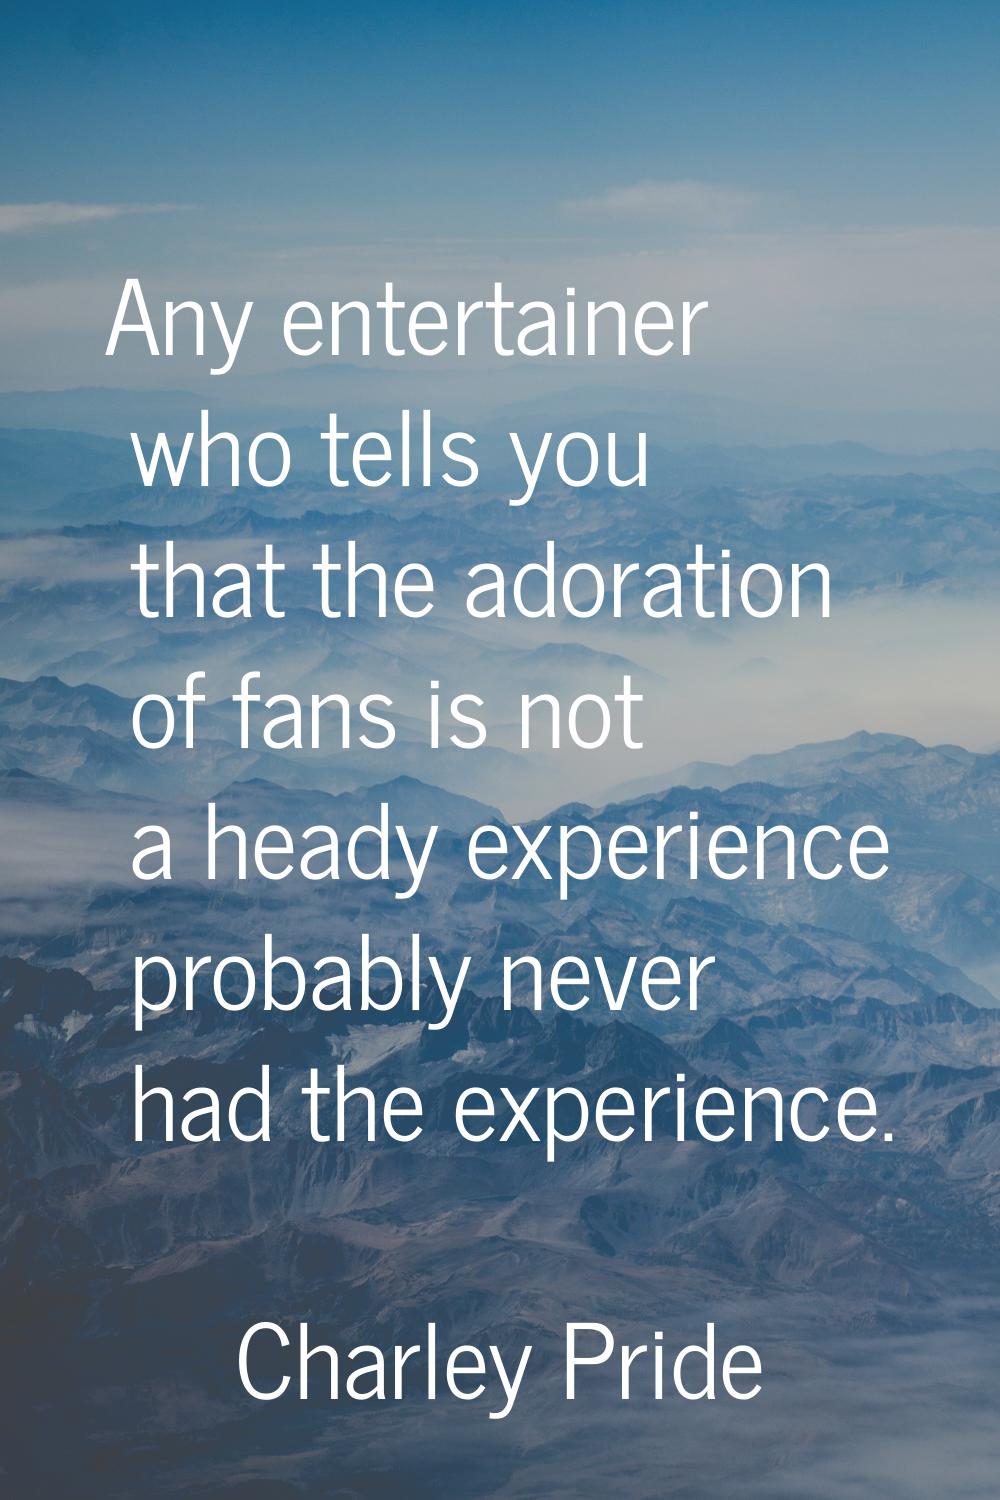 Any entertainer who tells you that the adoration of fans is not a heady experience probably never h